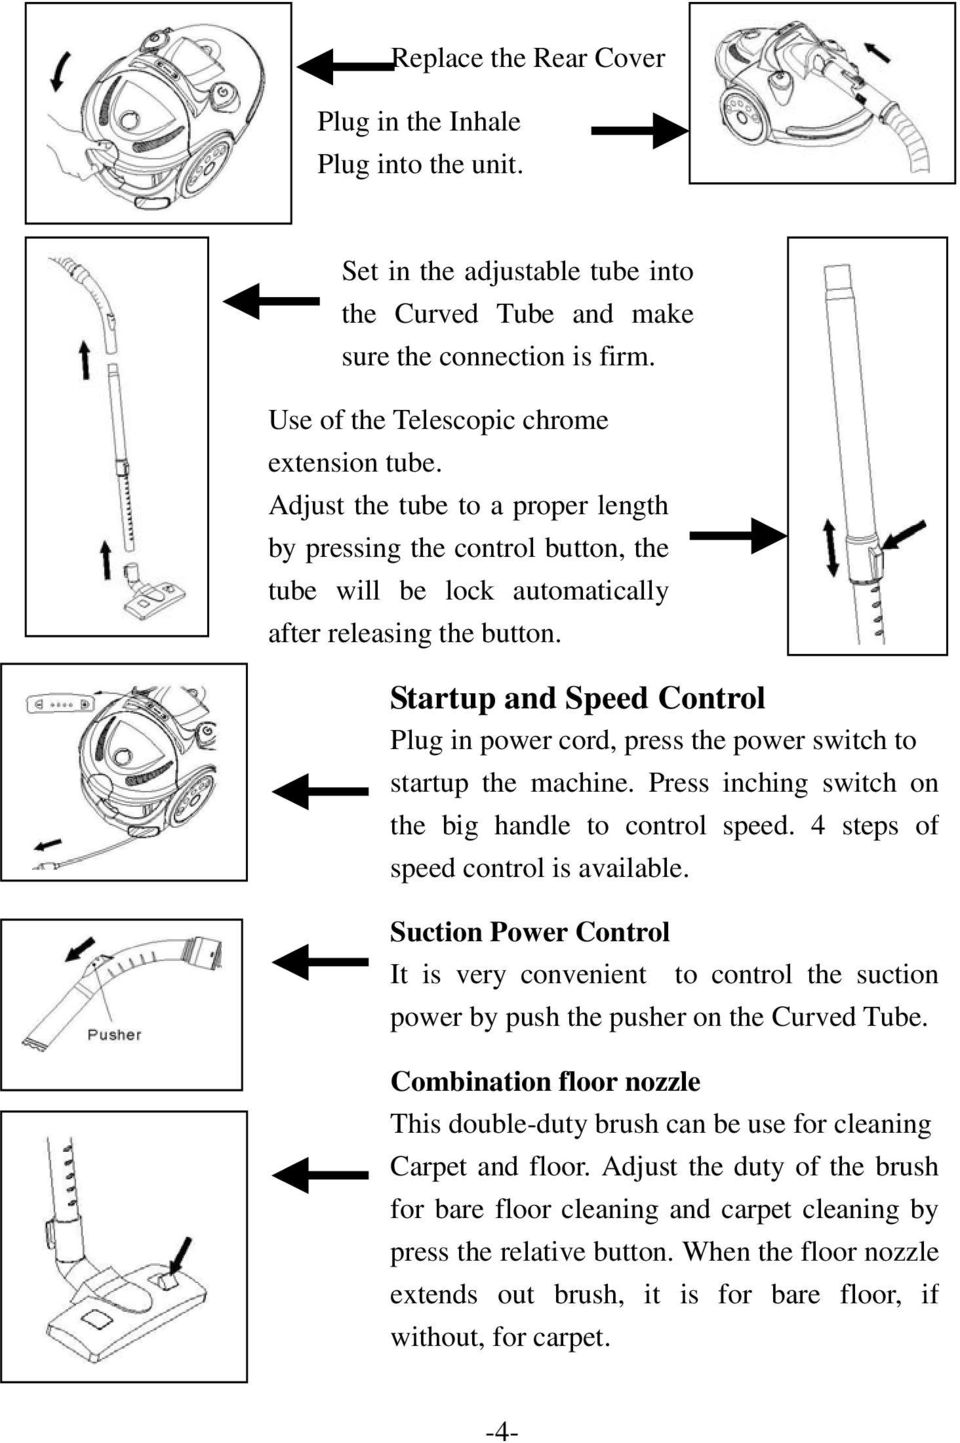 Startup and Speed Control Plug in power cord, press the power switch to startup the machine. Press inching switch on the big handle to control speed. 4 steps of speed control is available.